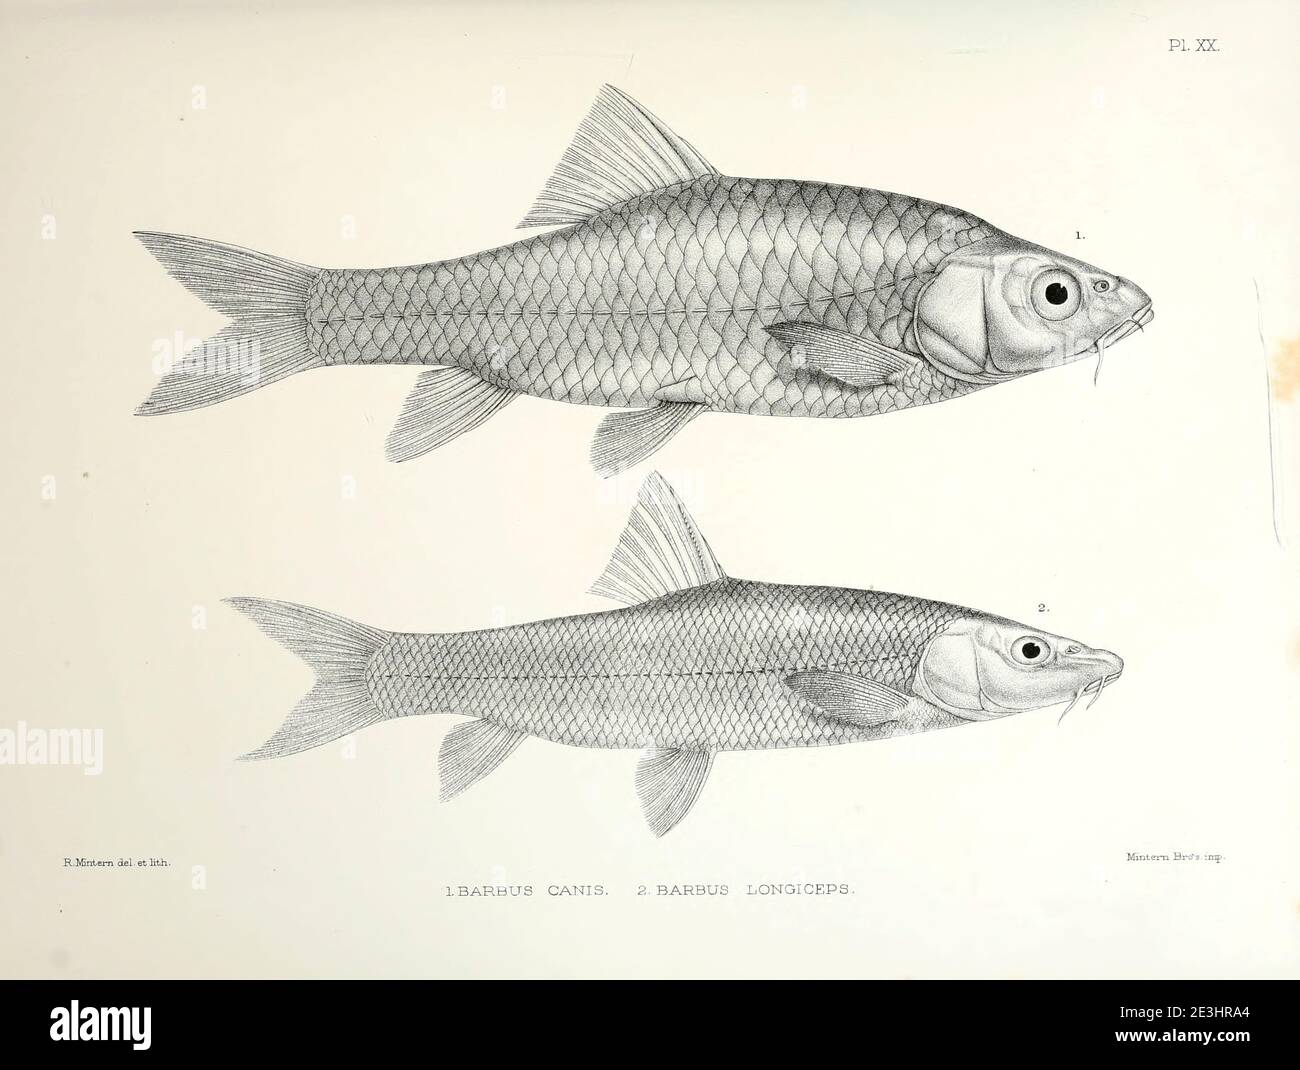 Barbus canis and Barbus longiceps fish From the survey of western Palestine. The fauna and flora of Palestine by Tristram, H. B. (Henry Baker), 1822-1906 Published by The Committee of the Palestine Exploration Fund, London, 1884 Stock Photo